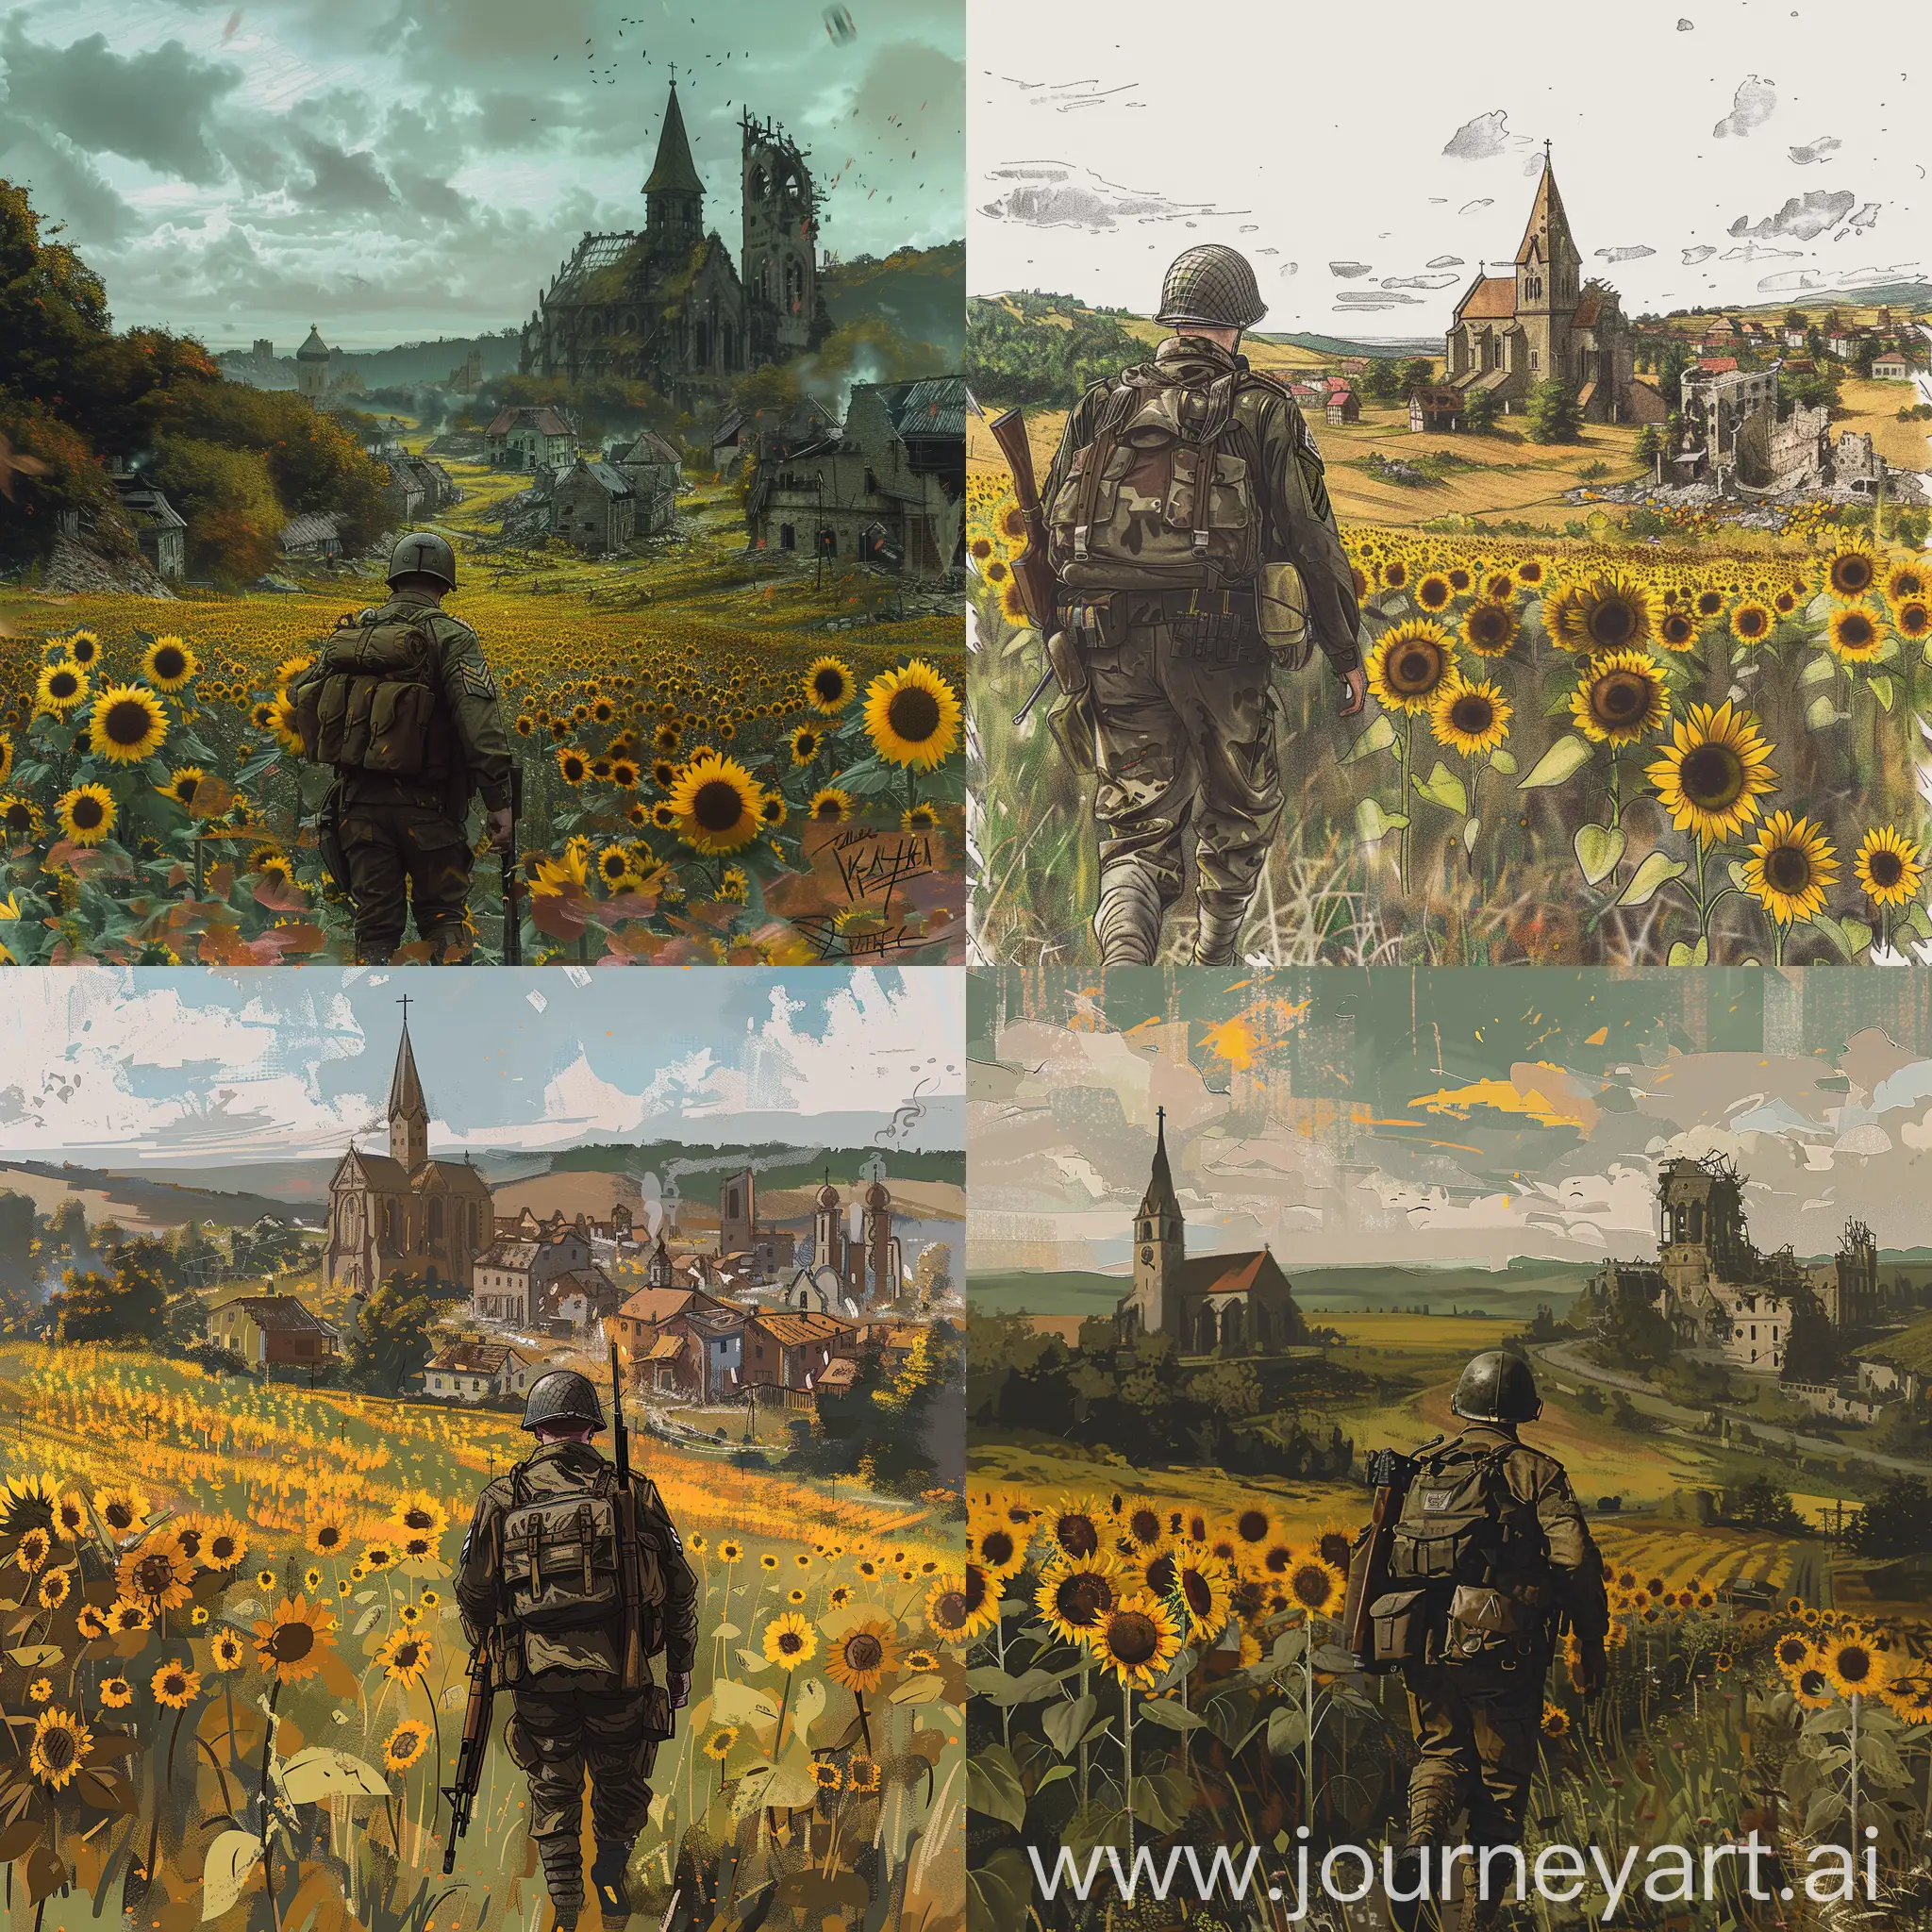 A soldier dressed in a uniform from the Second World War from the game Battlefield V walks through a field of sunflowers, and far ahead stands an old dilapidated church with one tower, and on the right a dilapidated city in a digital doodle style drawn by amateur artist